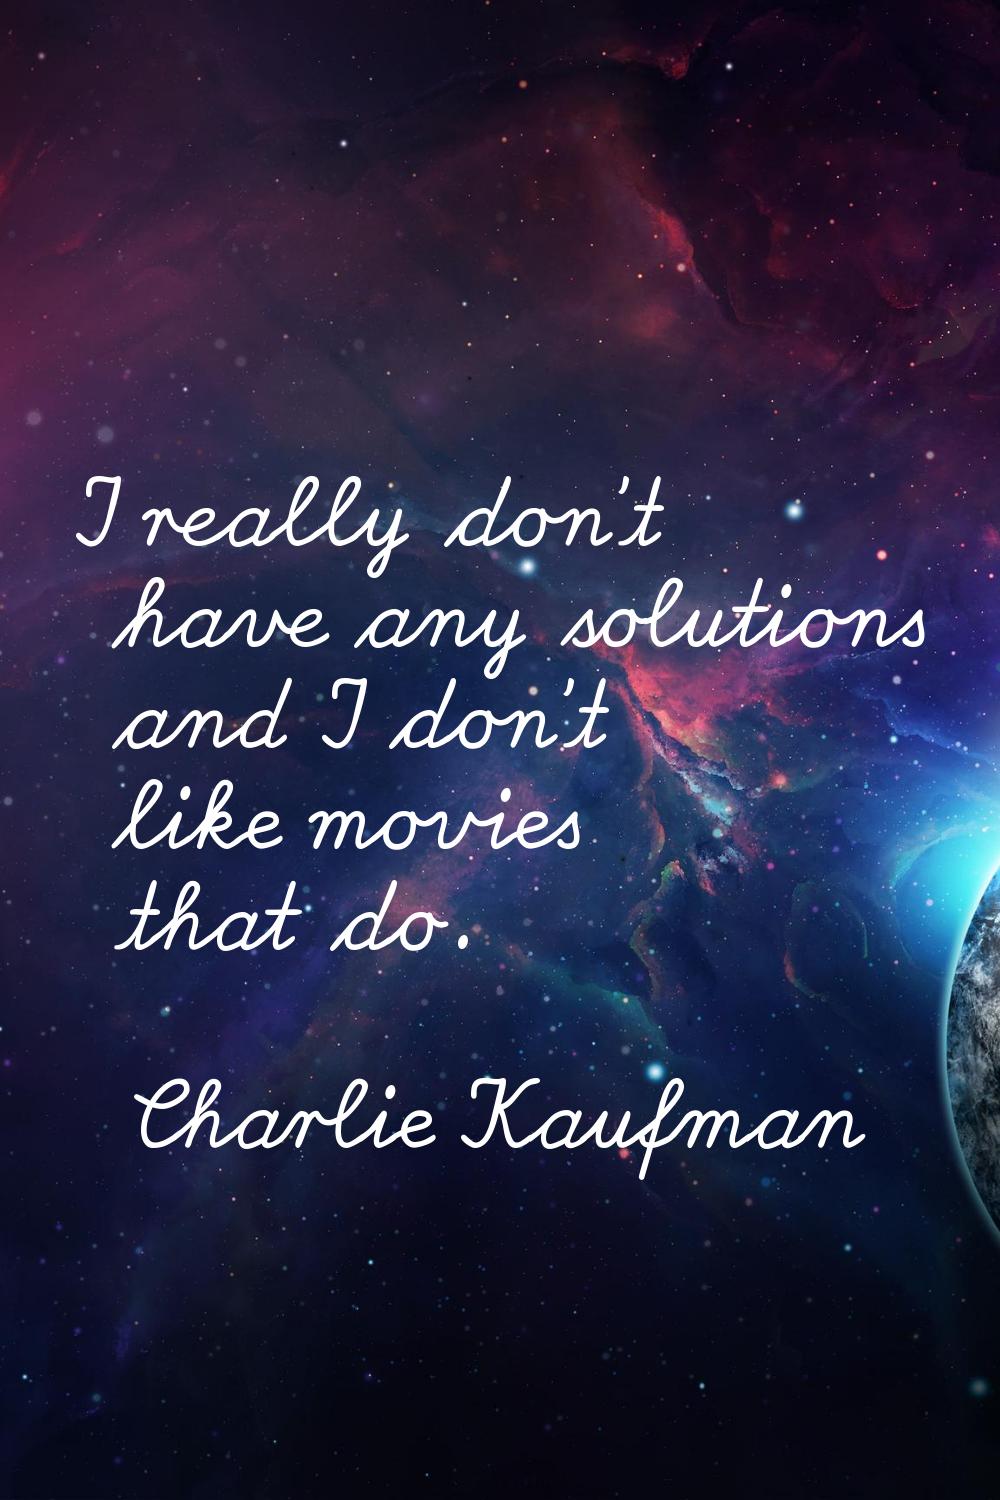 I really don't have any solutions and I don't like movies that do.